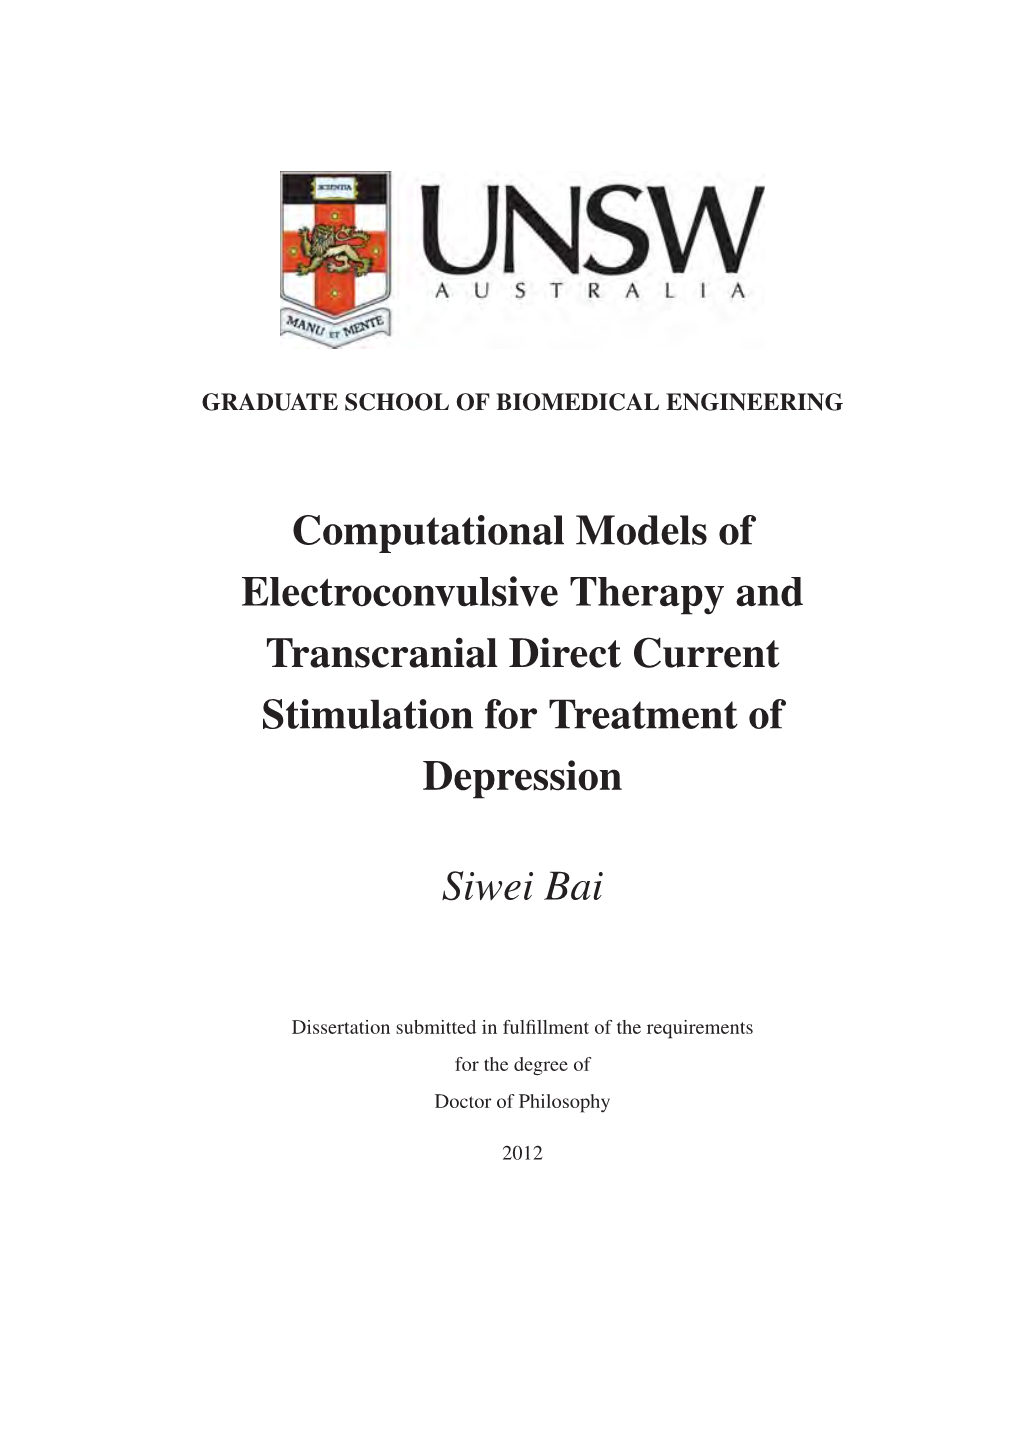 Computational Models of Electroconvulsive Therapy and Transcranial Direct Current Stimulation for Treatment of Depression